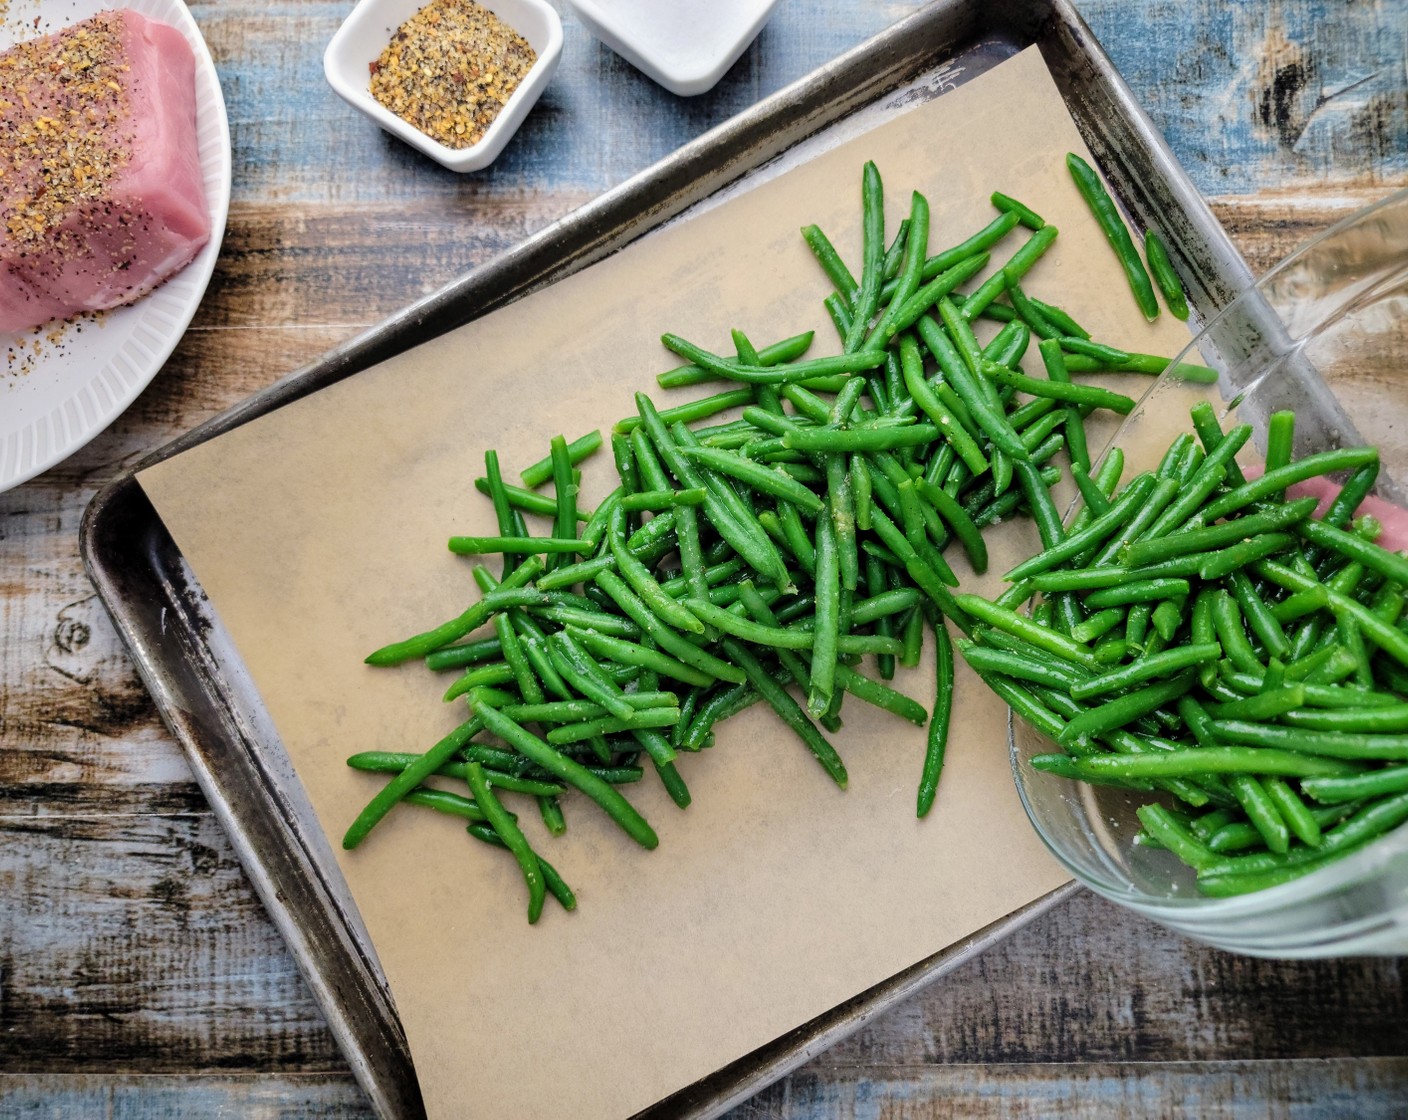 step 4 Lay the green beans onto a lined sheet pan and set aside.